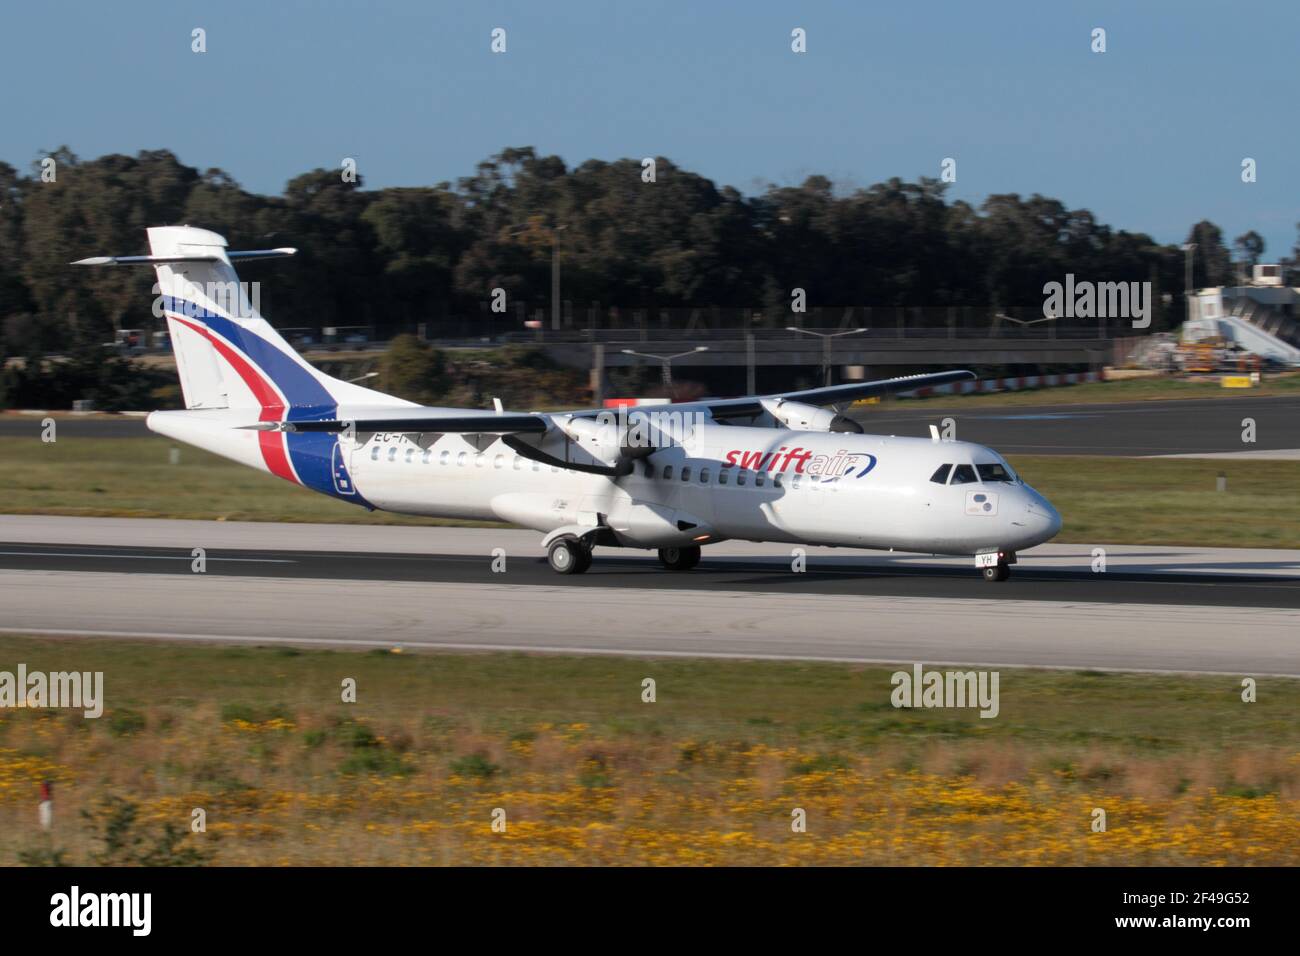 Swiftair ATR 72 propeller powered cargo plane on the runway while departing from Malta. Turboprop commercial airplane. Stock Photo